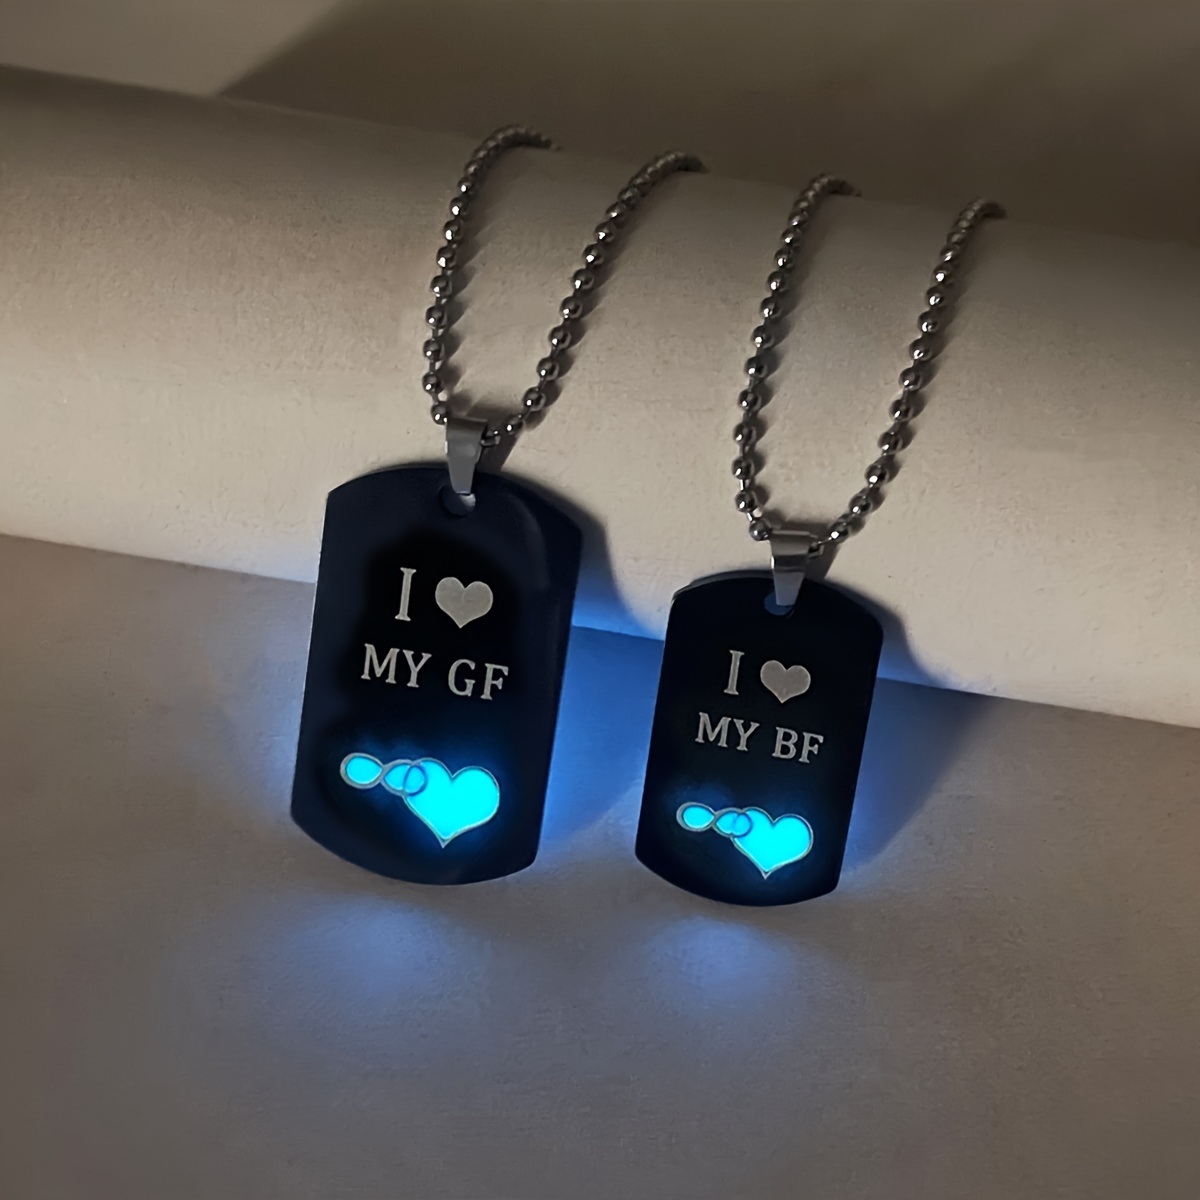 

2pcs Glow-in-the-dark "i Love My Bf & Gf" Stainless Steel Dog Tag Pendants, Eternal Love Couples Necklaces, Cute & Simple Style Neck Jewelry For Music Festival